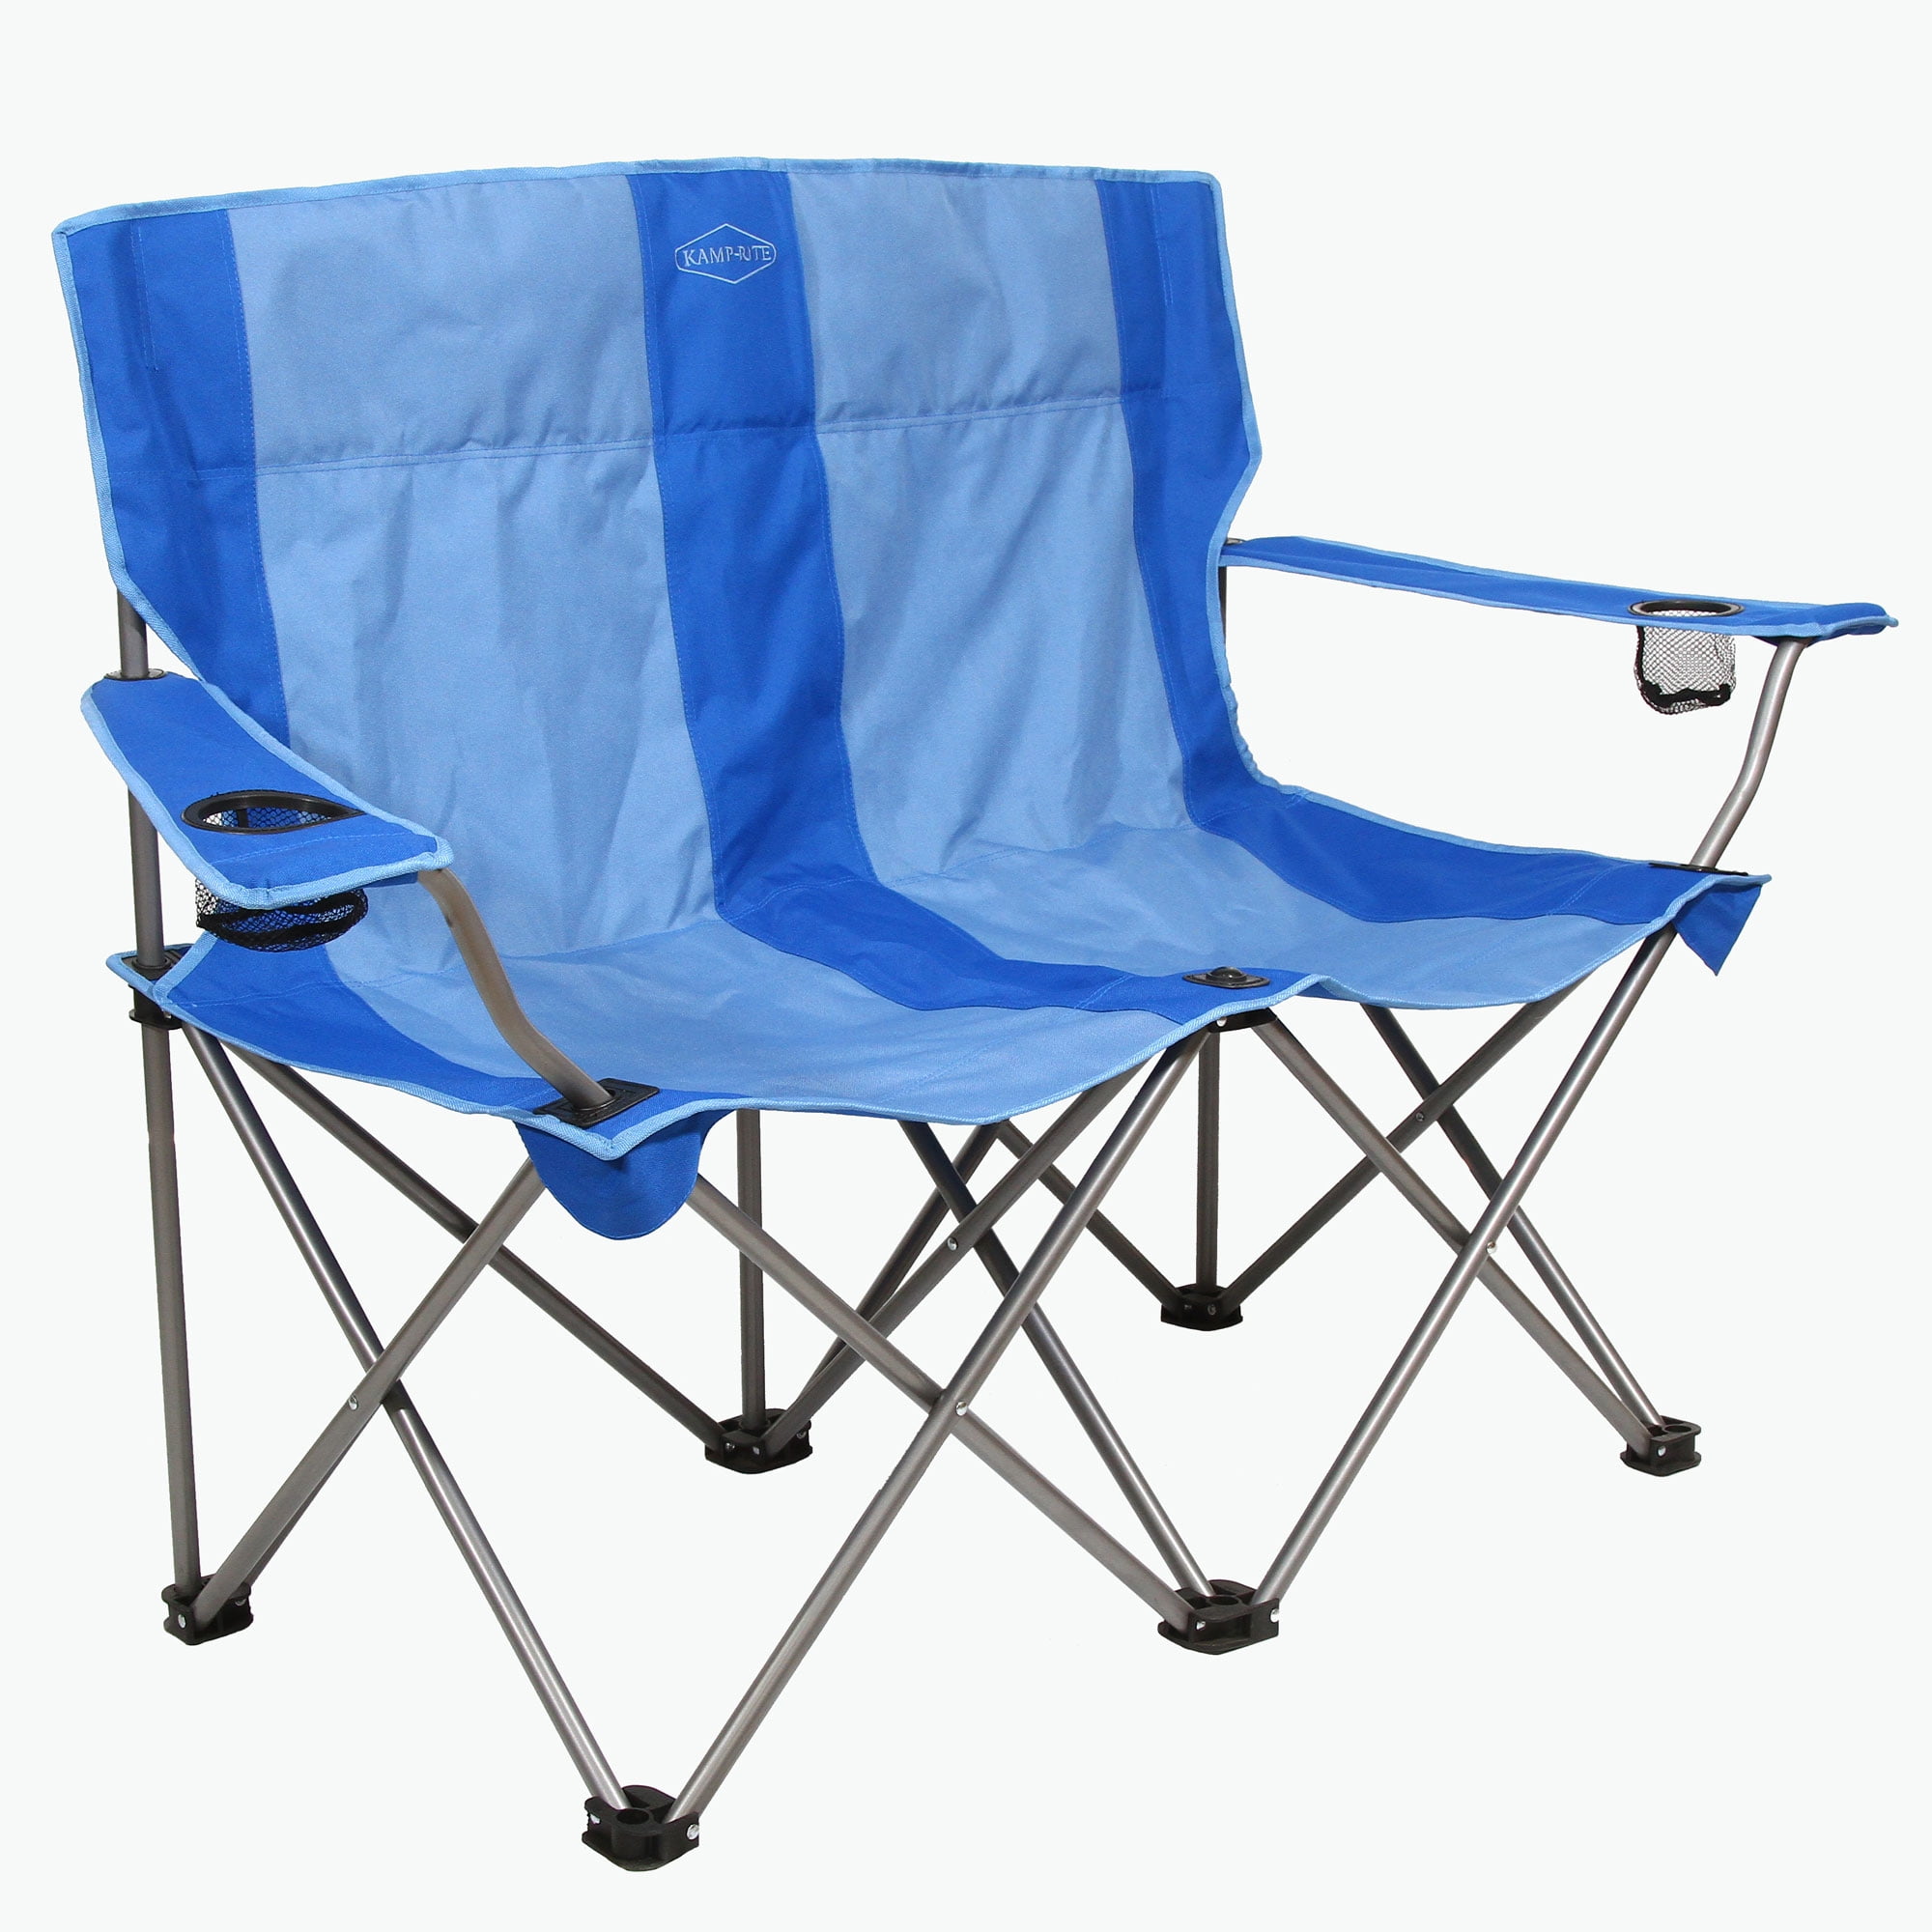 2X Beach Chair BLUE Foldable Camping Furniture Light Outdoor Summer Camping AU 